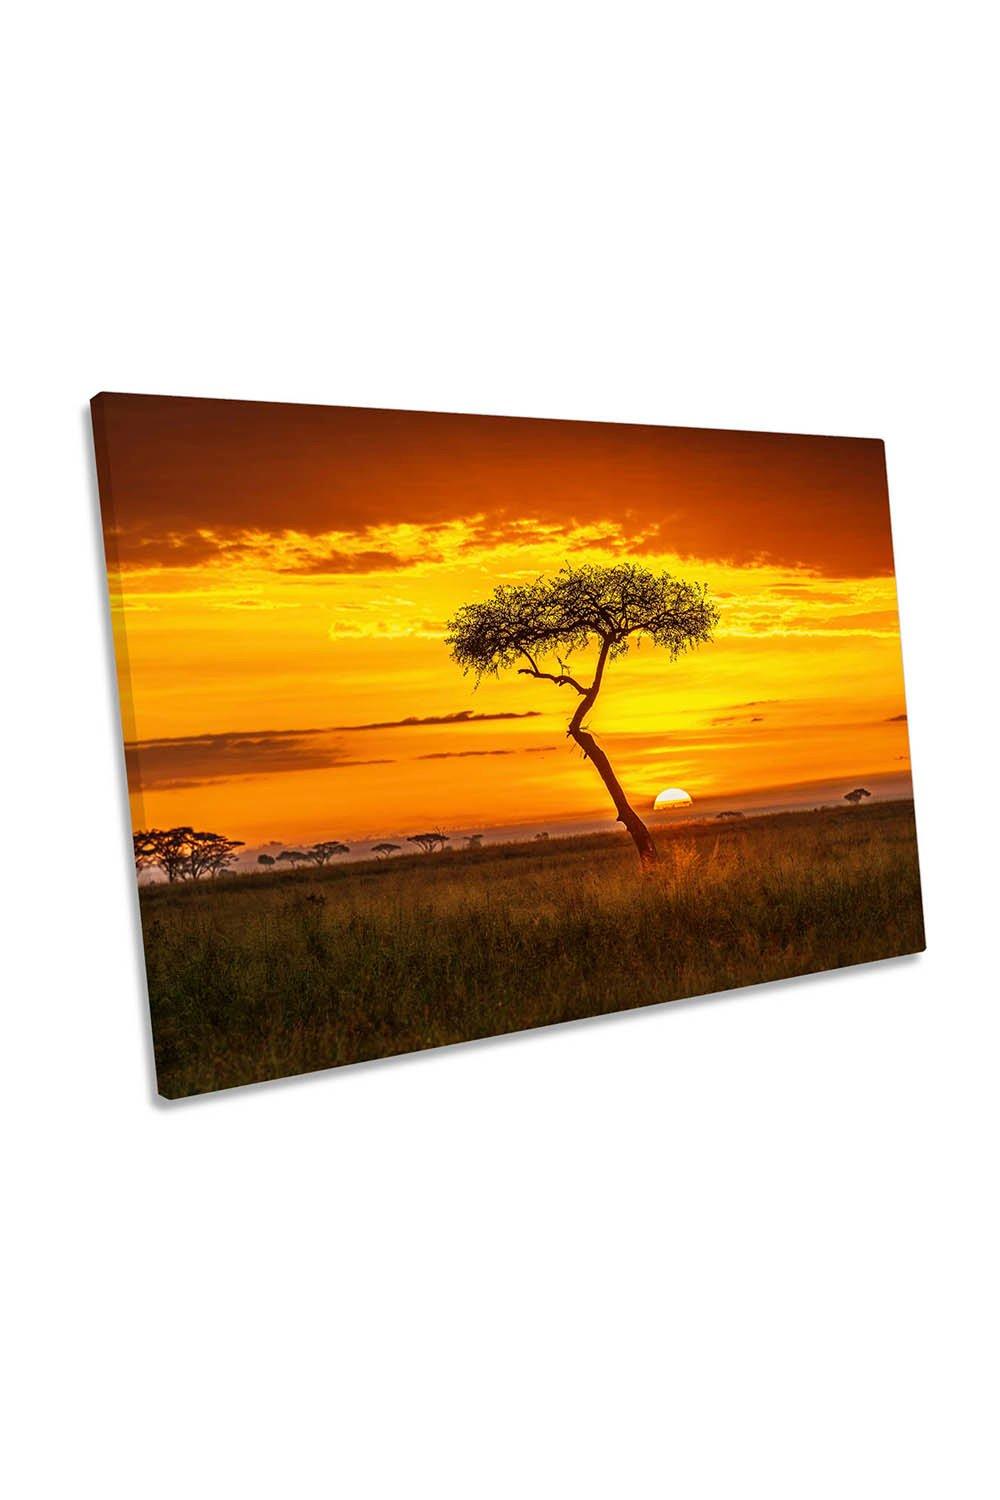 Primordial Africa Orange Sunset Tree Canvas Wall Art Picture Print